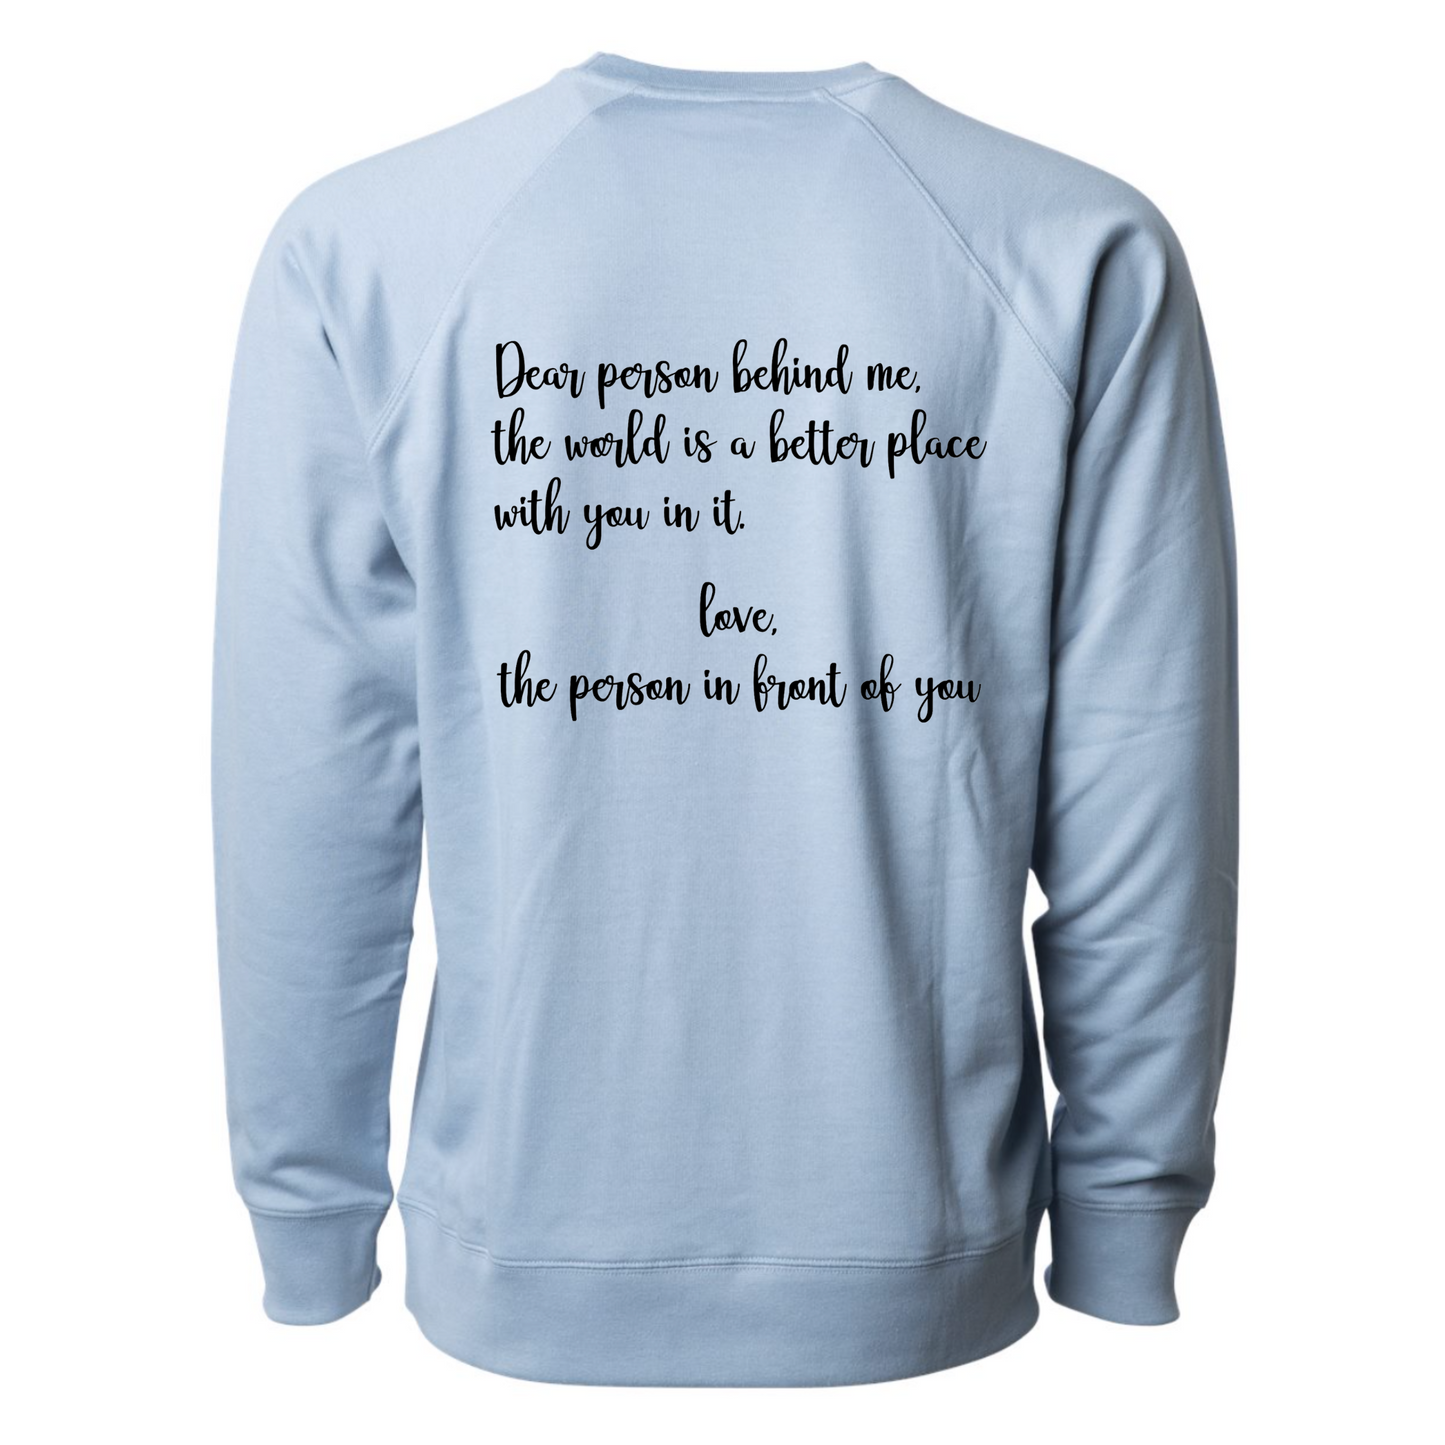 Dear Person Behind Me - Pull Over Sweatshirt in light blue. Designs are in black. The back says "Dear person behind me, the world is a better place with you in it. Love the person in front of you" in a cursive design. The front design is on the right hand side, as a small pocket square with the saying "be kind to your mind" in cursive with a heart and semi colon surrounding it. This is the back view of the sweatshirt.